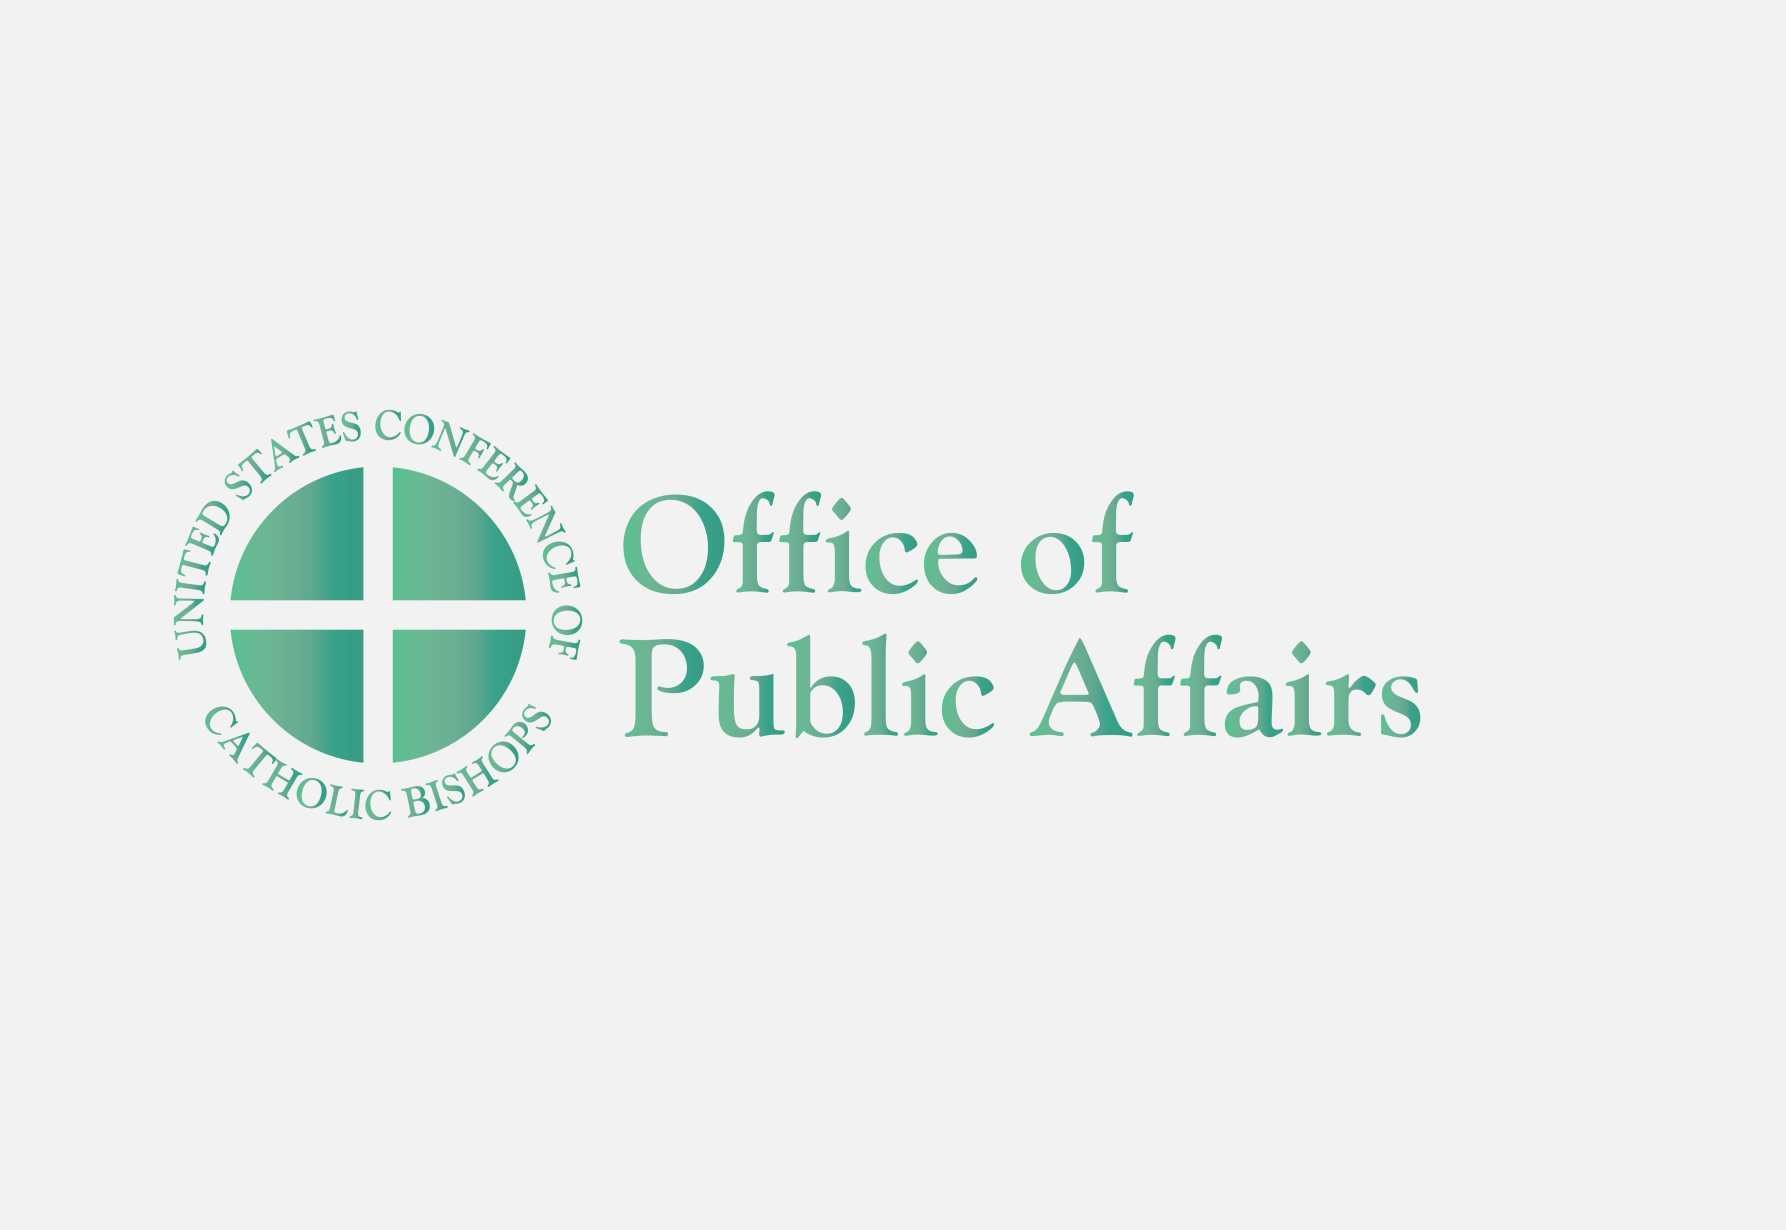 Statement to Mark 25th Anniversary of International Religious Freedom Act